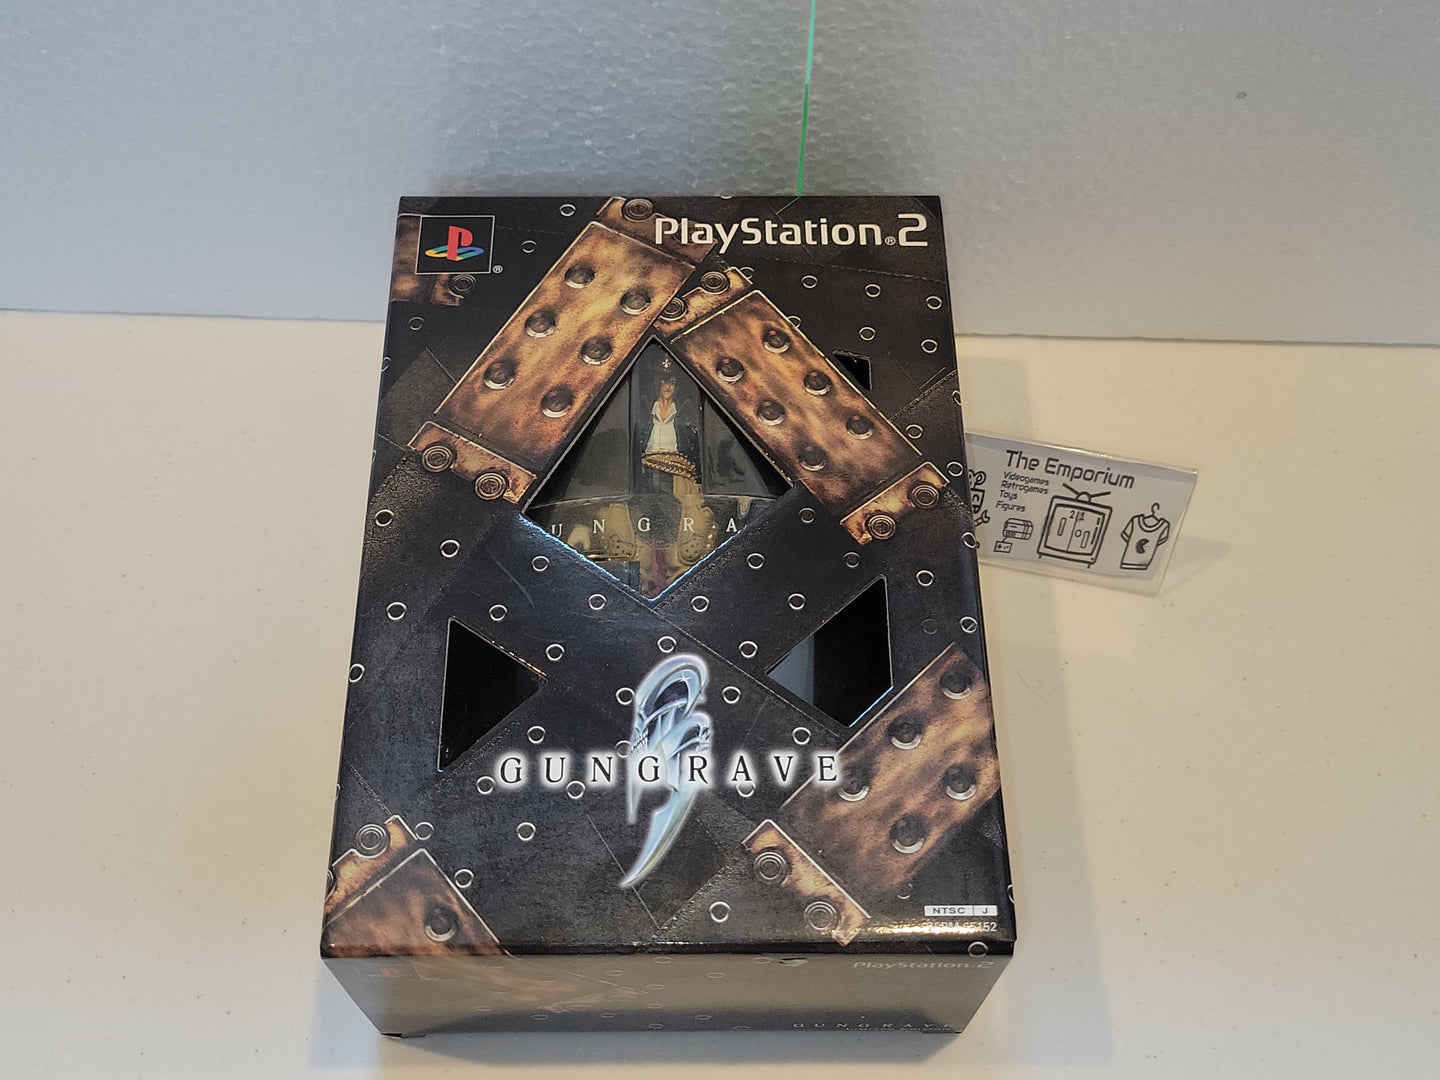 Gungrave [Limited Edition] - Sony playstation 2